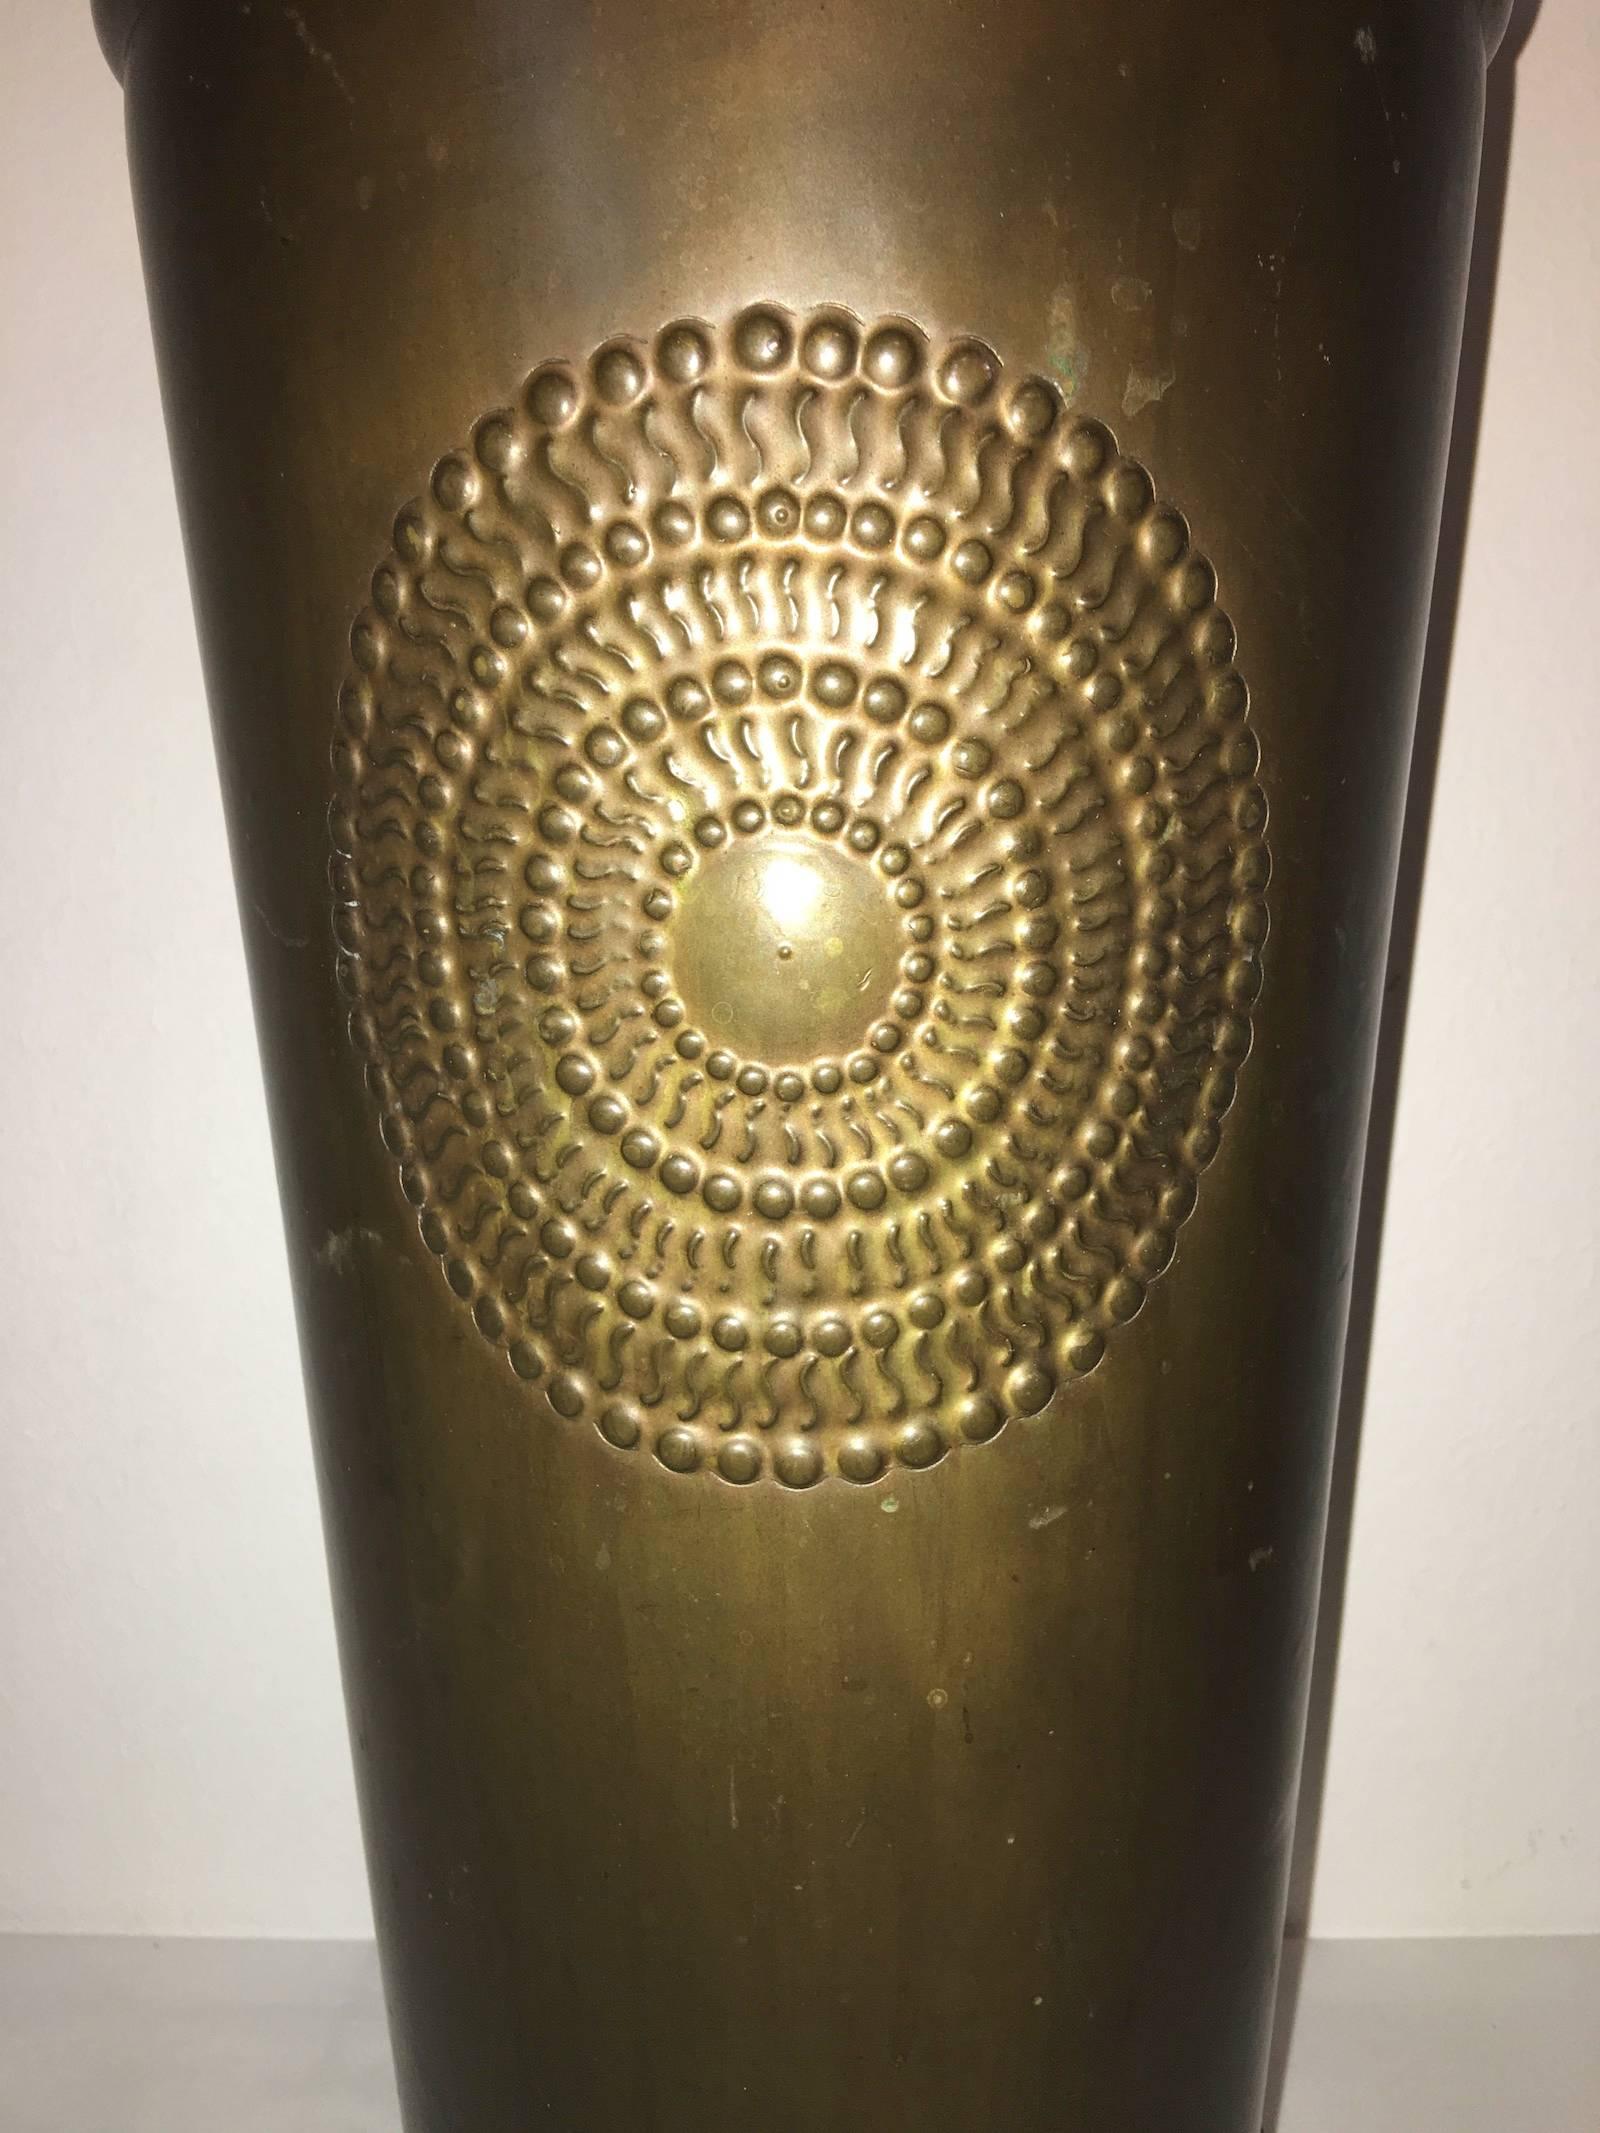 A nice copper umbrella stand with starburst sunburst motif, made in the 1930's in Germany. It has a small dent on the upper edge from normal use over the years. Have a look at the pictures. Great piece. .